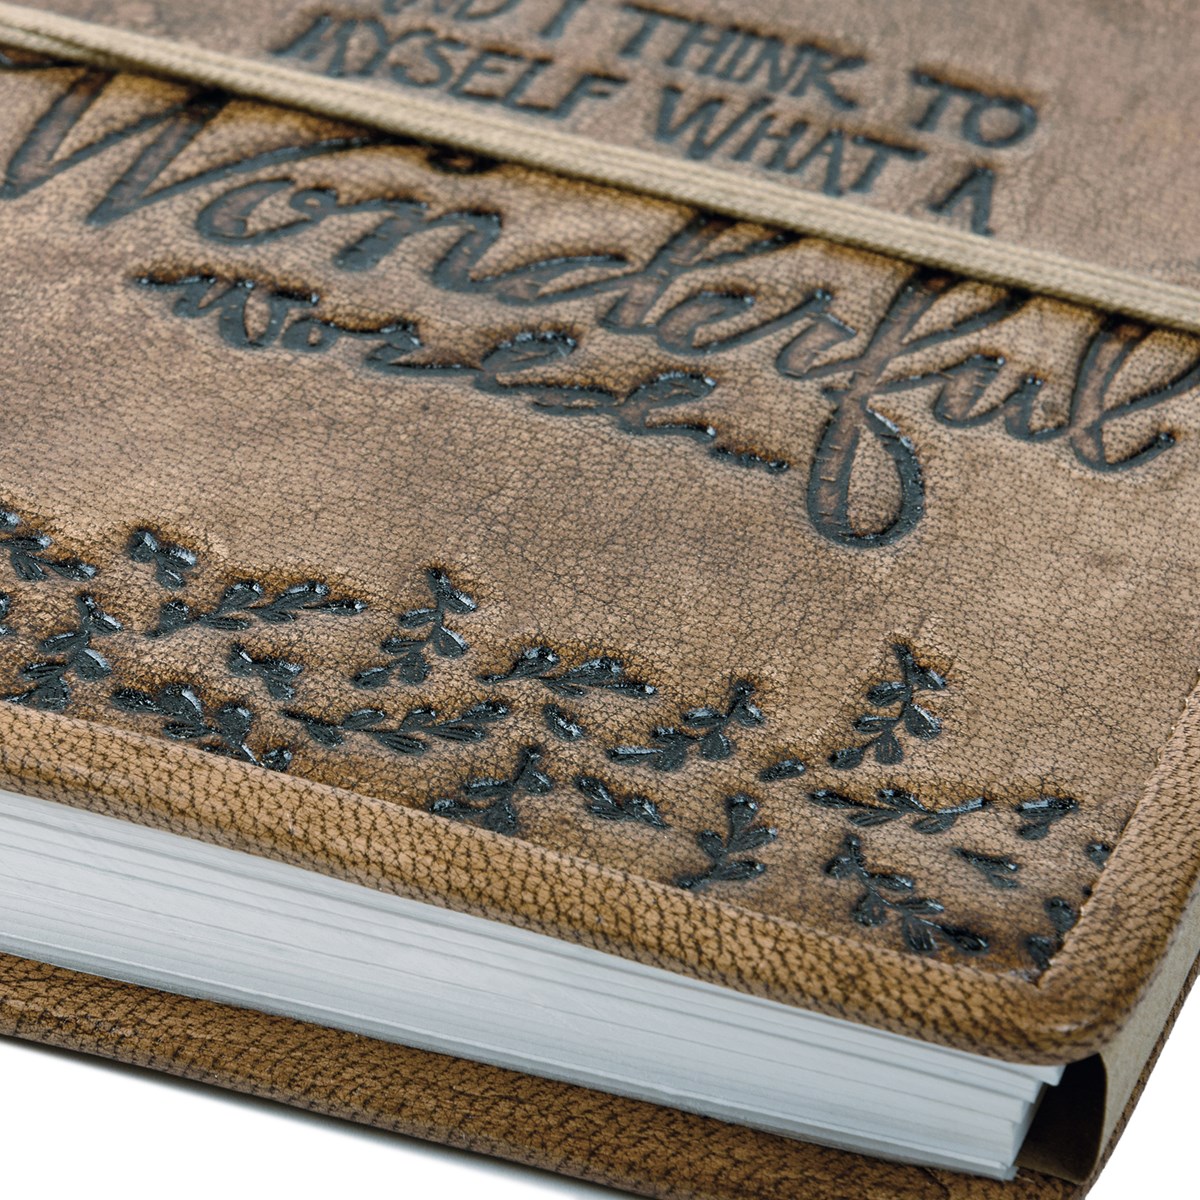 What A Wonderful World Journal - Leather, Paper